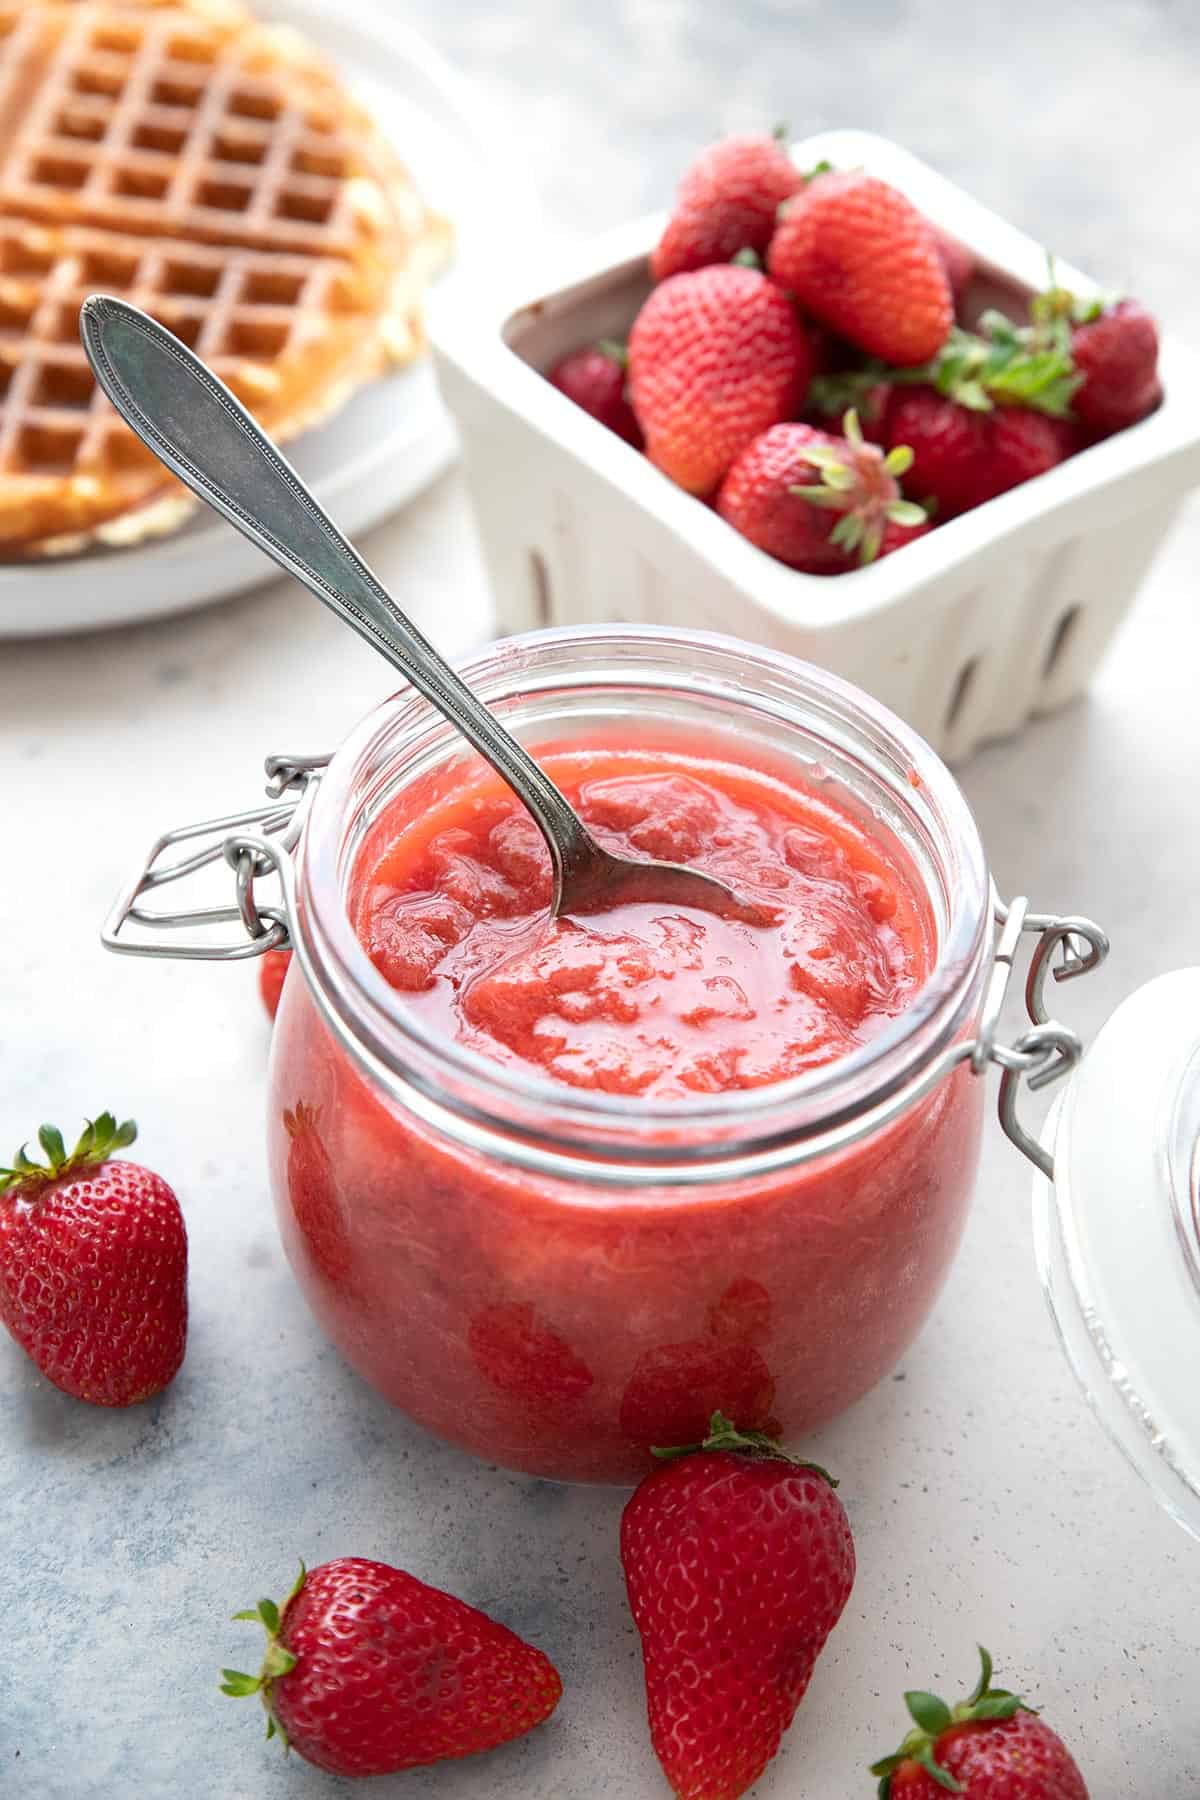 Strawberry rhubarb sauce in a jar, with a pint of strawberries and some waffles in the background.